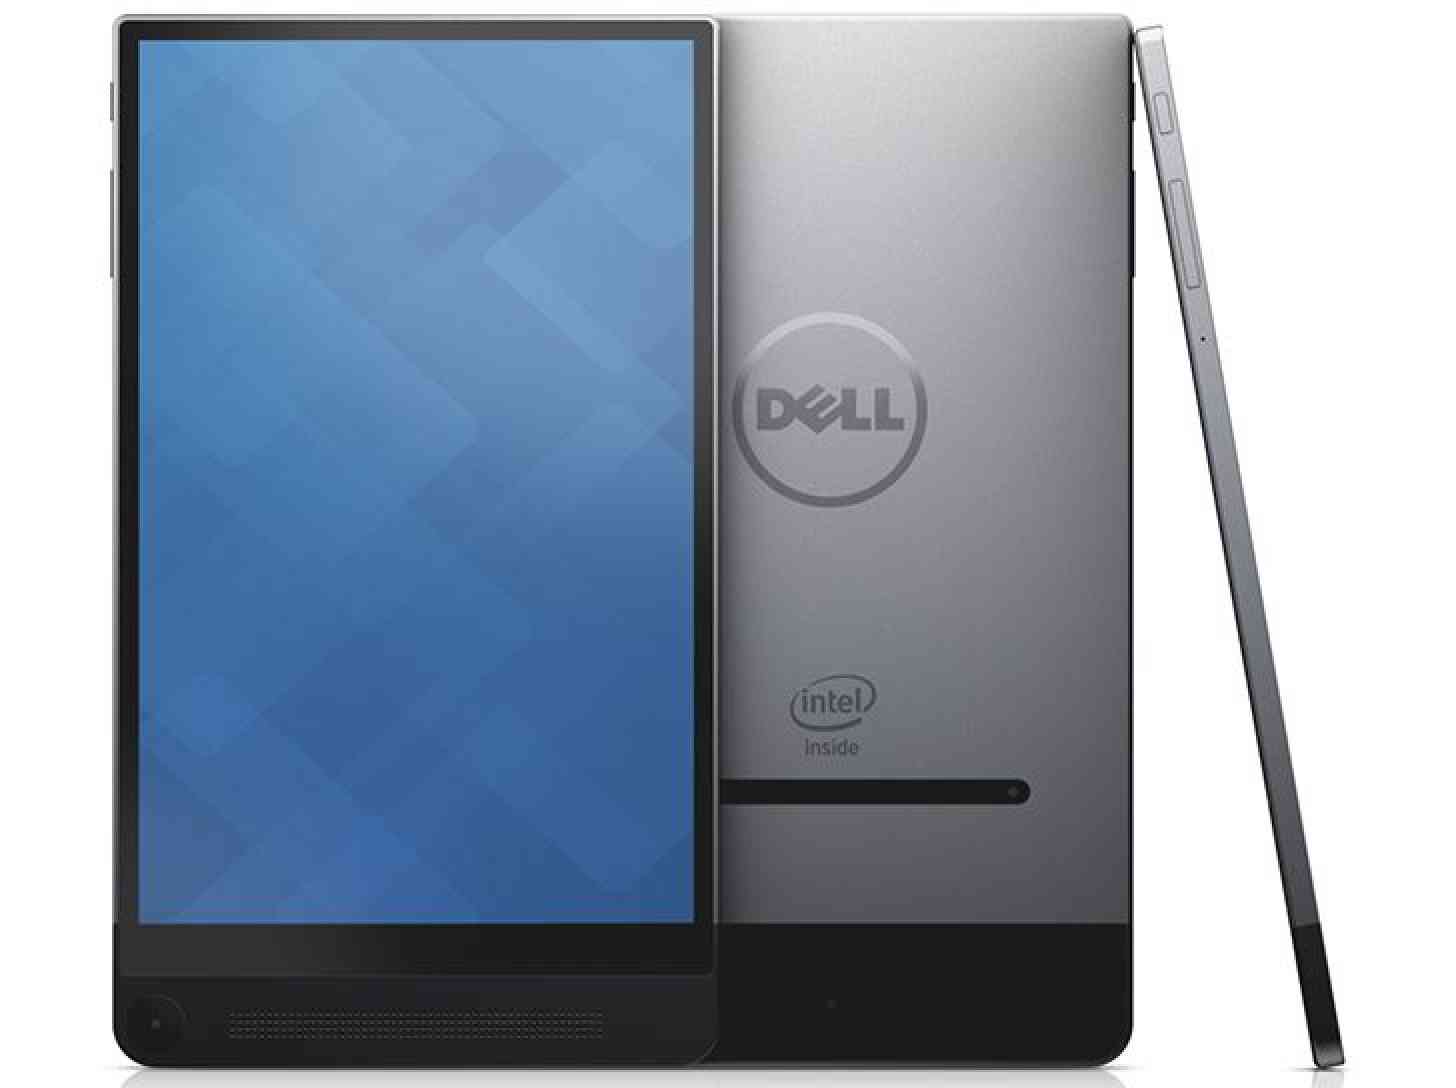 Dell Venue 8 7000 Series Android tablet group